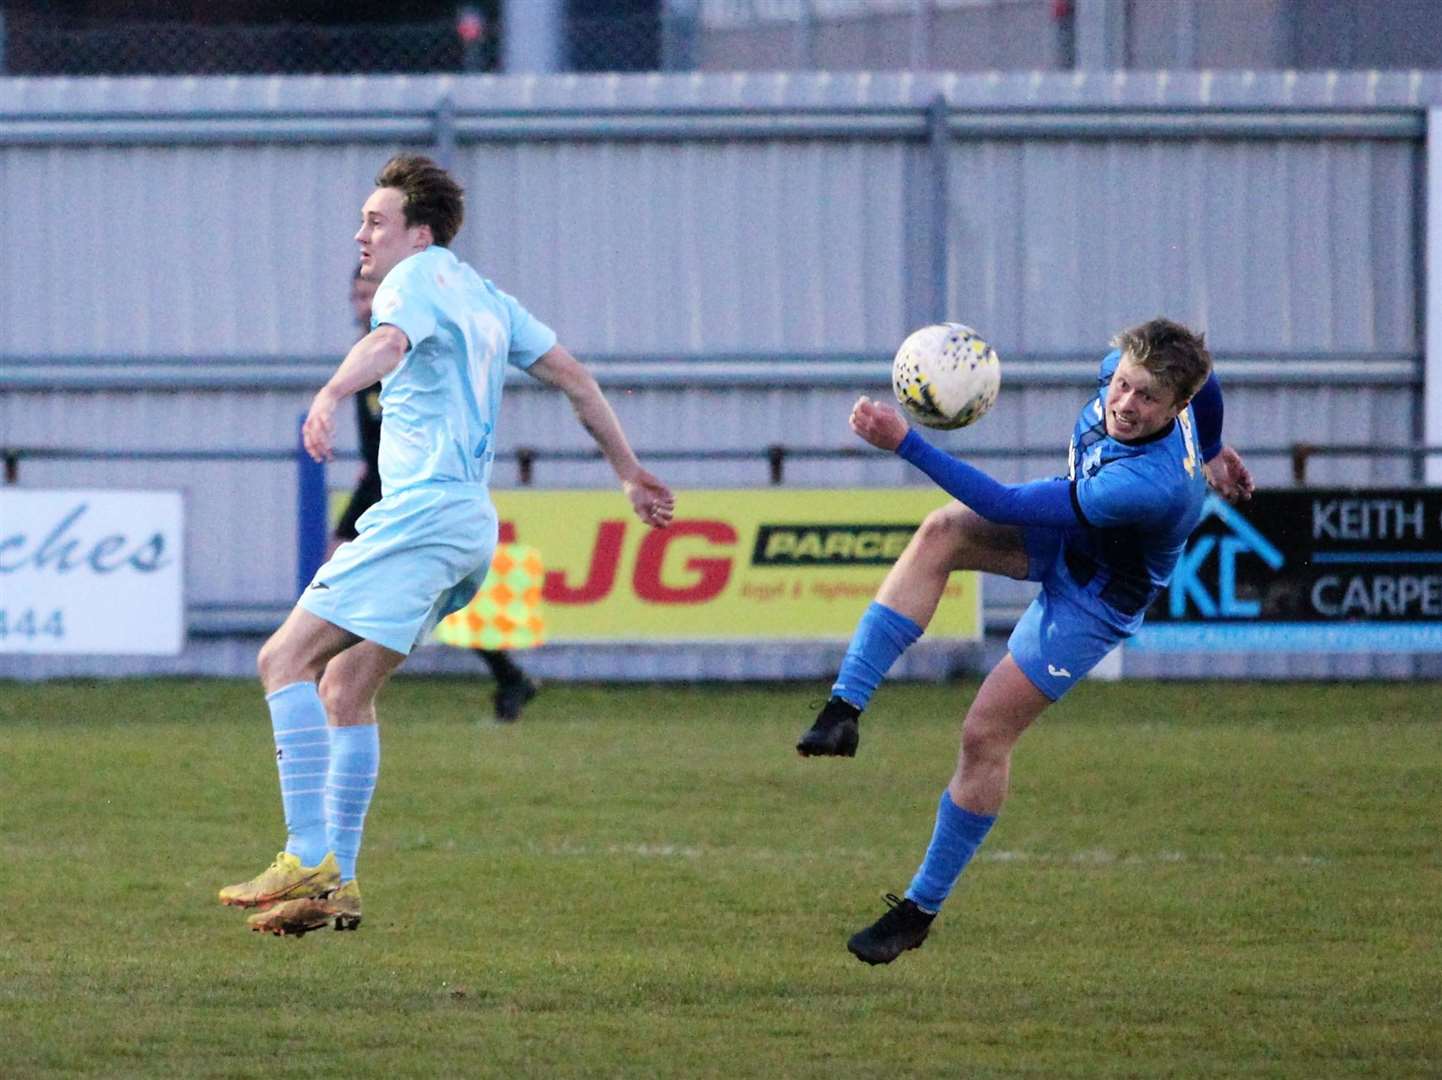 Joe Cuthbert clears the ball away from Keith's Gavin Elphinstone. Picture: Frances Porter